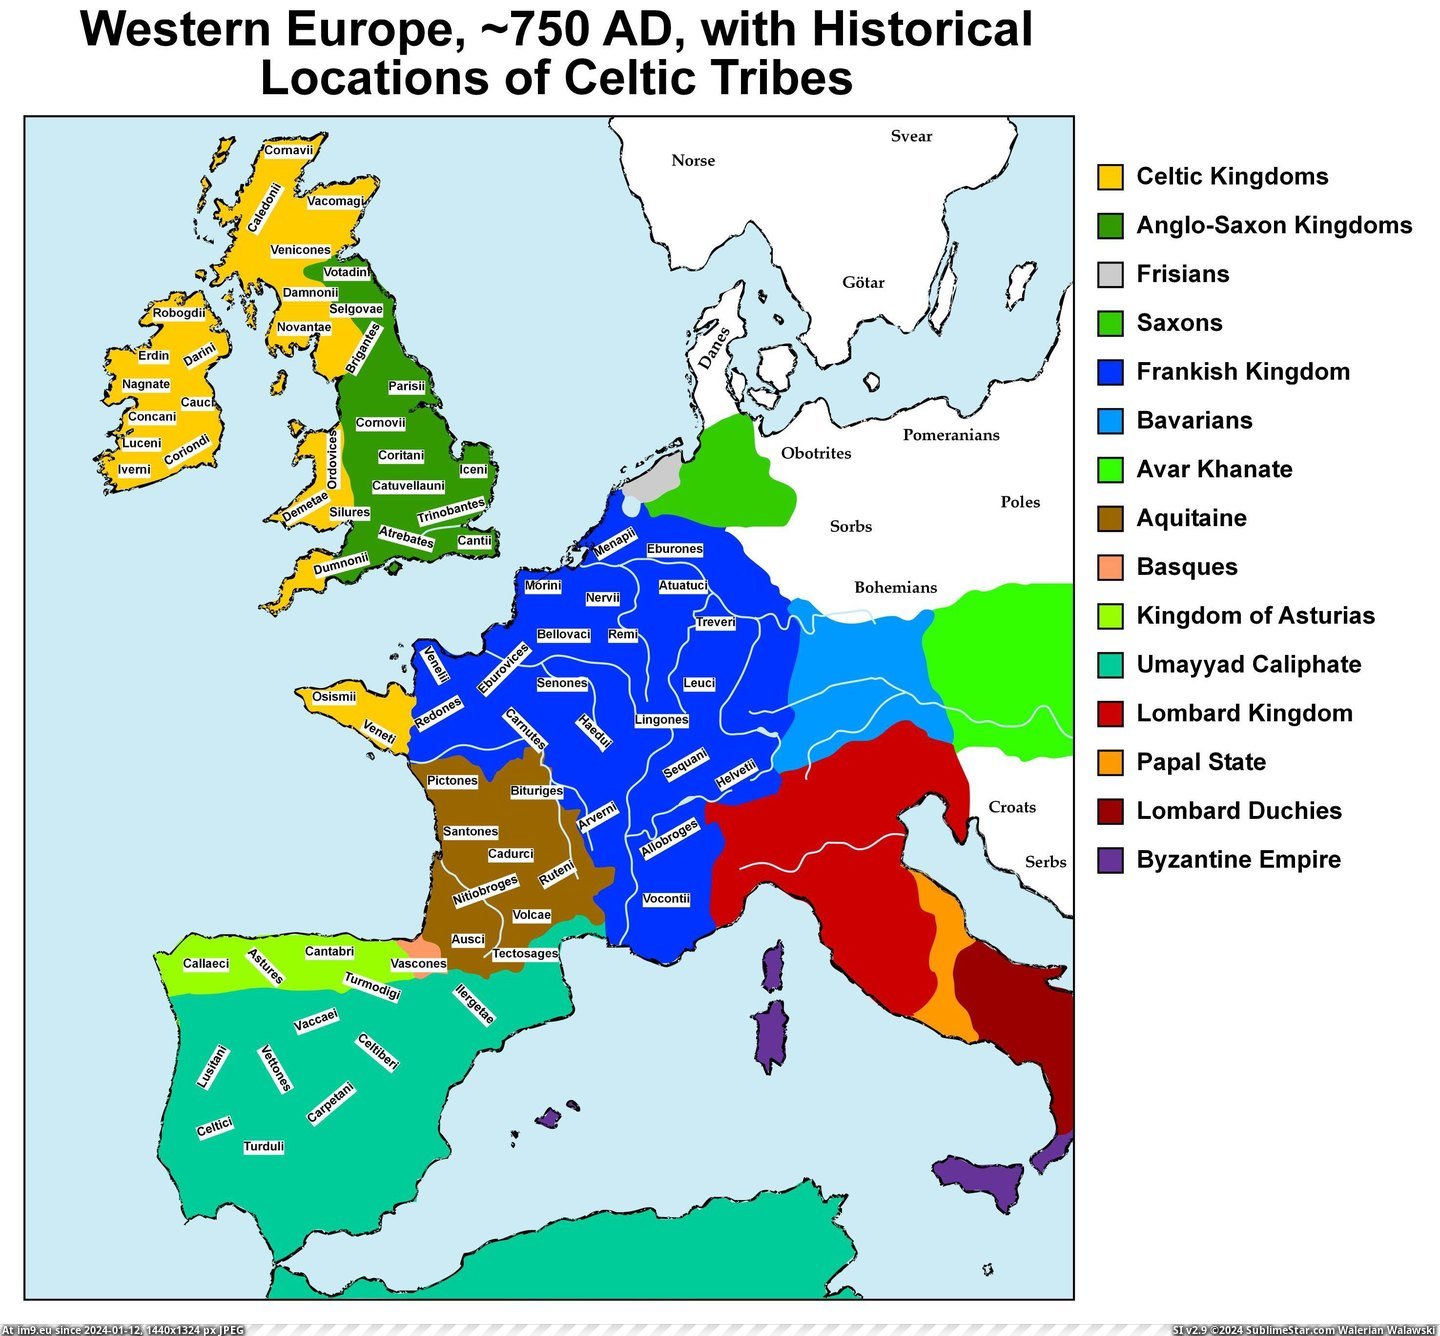 #Europe #Western #Celtic #Tribes #Historical #Locations [Mapporn] Historical locations of Celtic tribes in Western Europe in ~750 AD [2950x2725] Pic. (Image of album My r/MAPS favs))